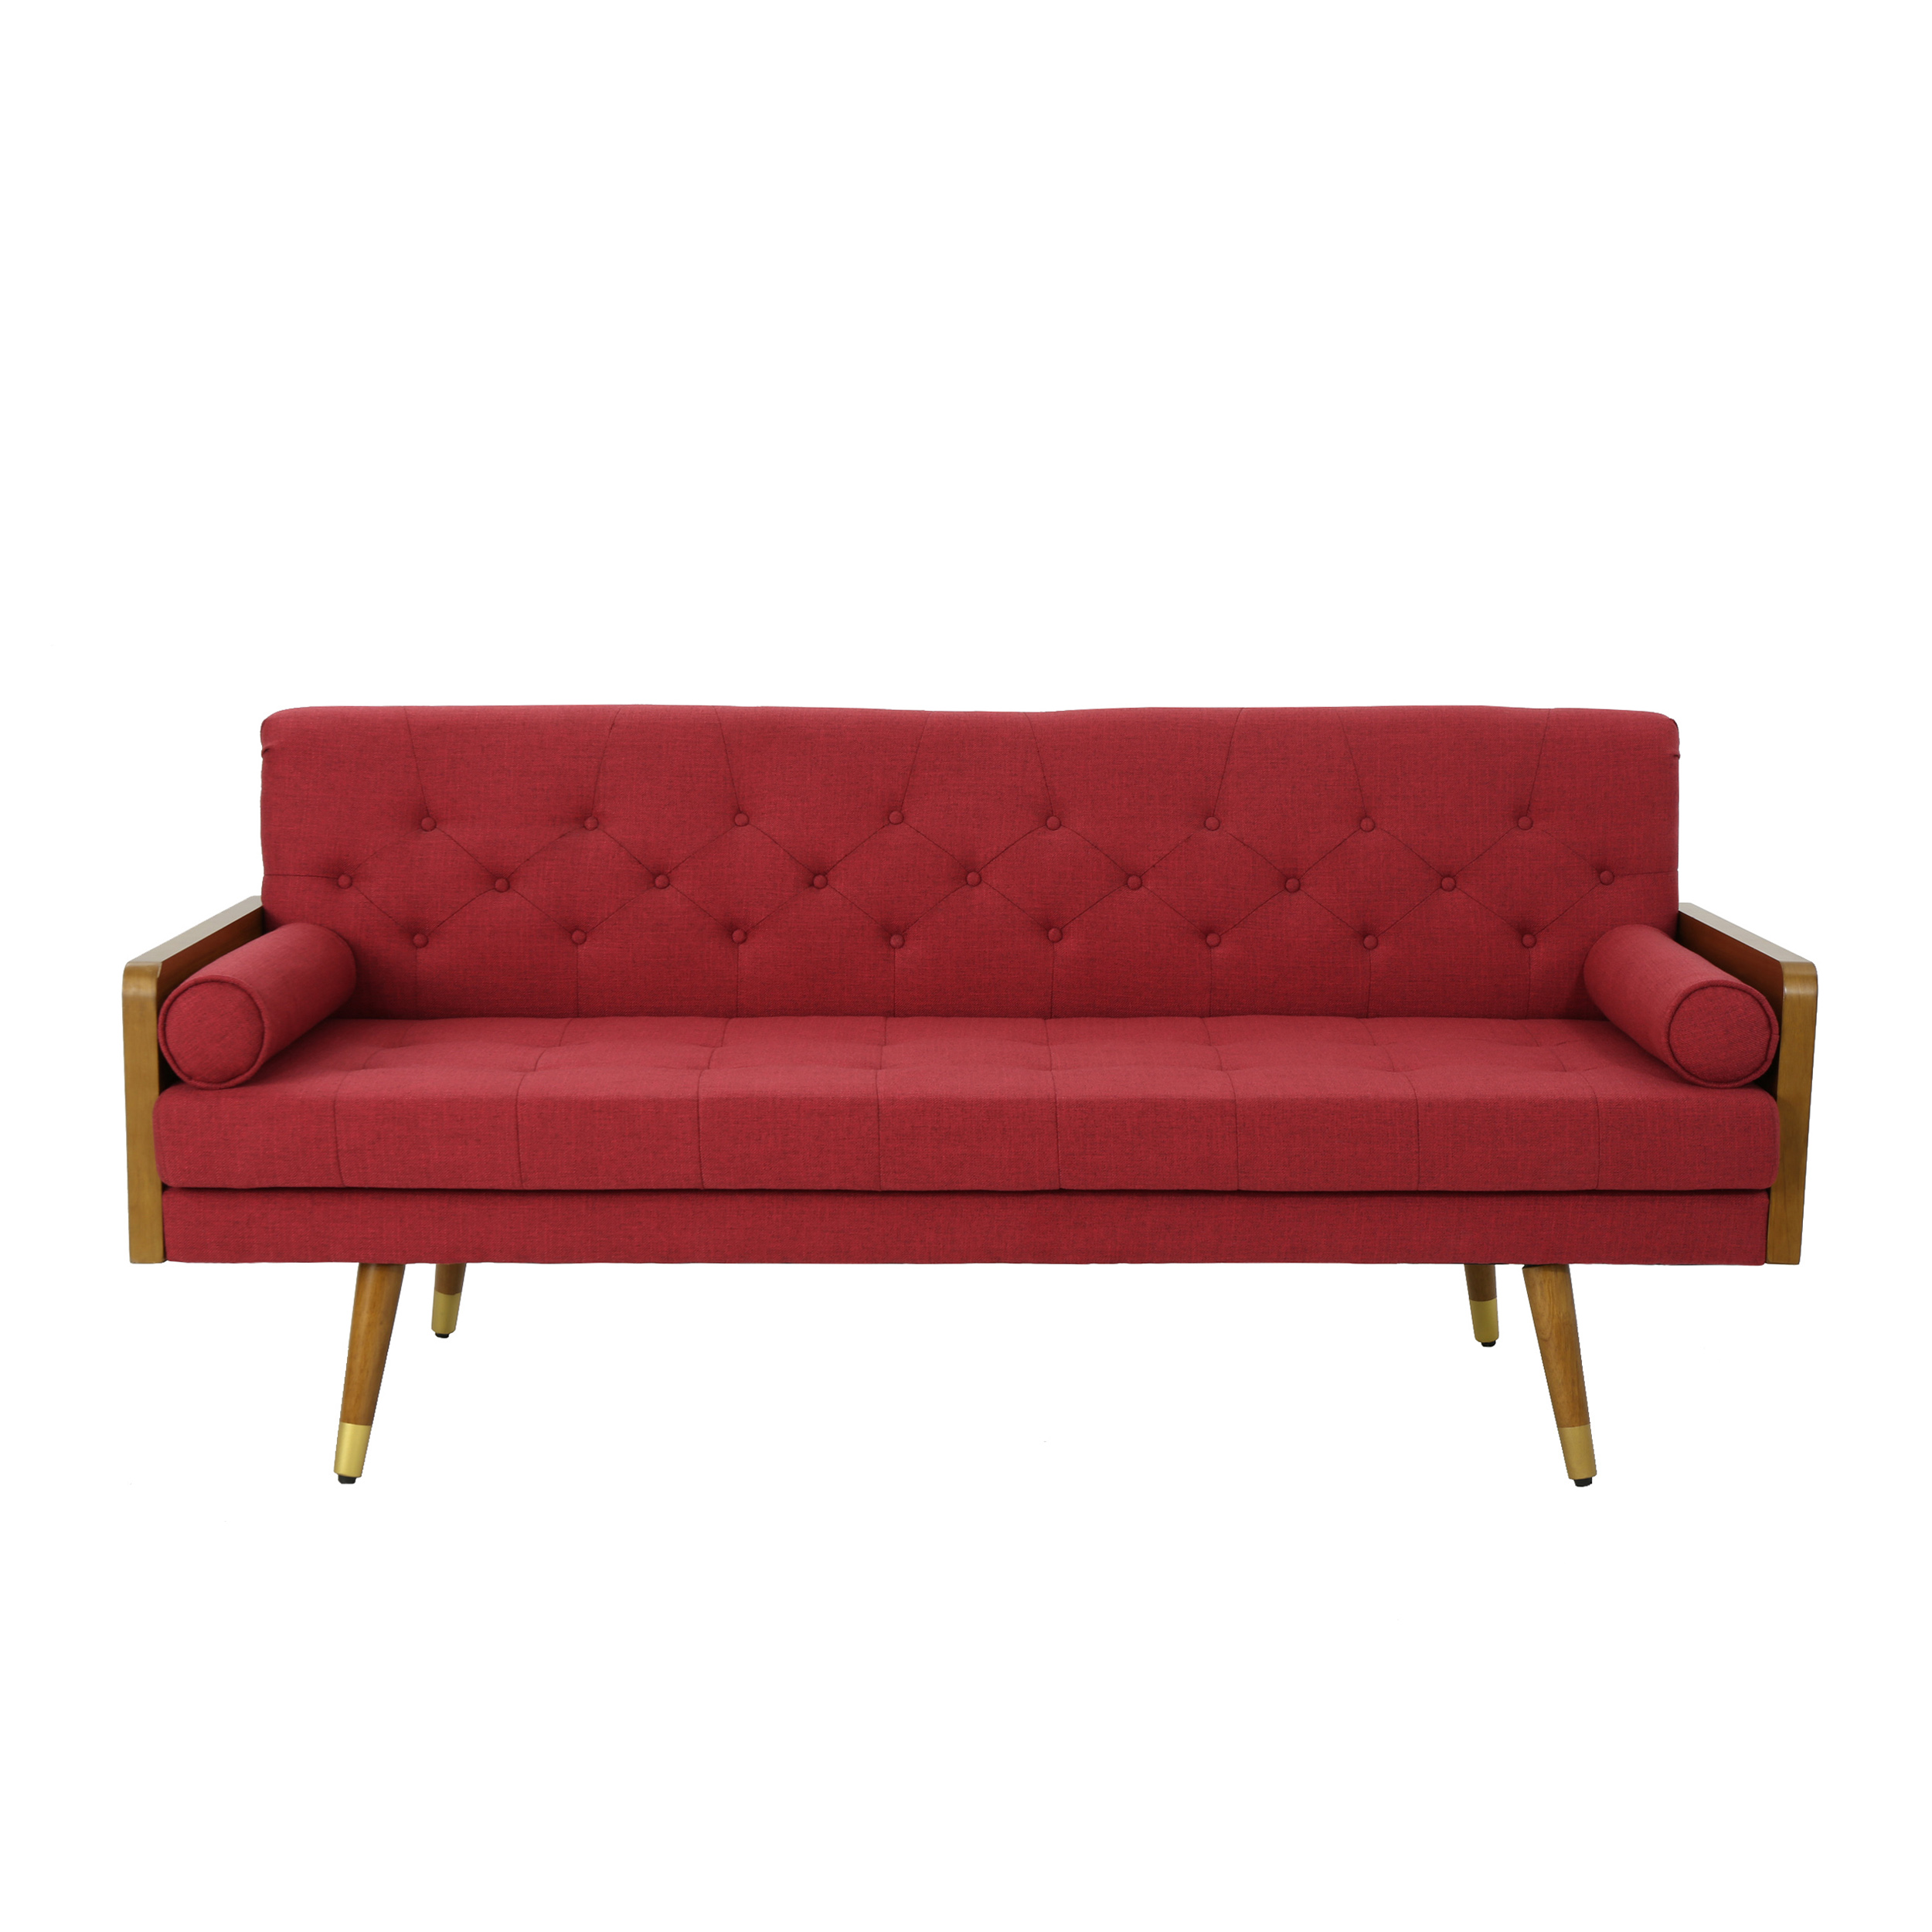 Noble House Nathanial Tufted Fabric Sofa, Red, Dark Walnut - image 5 of 7